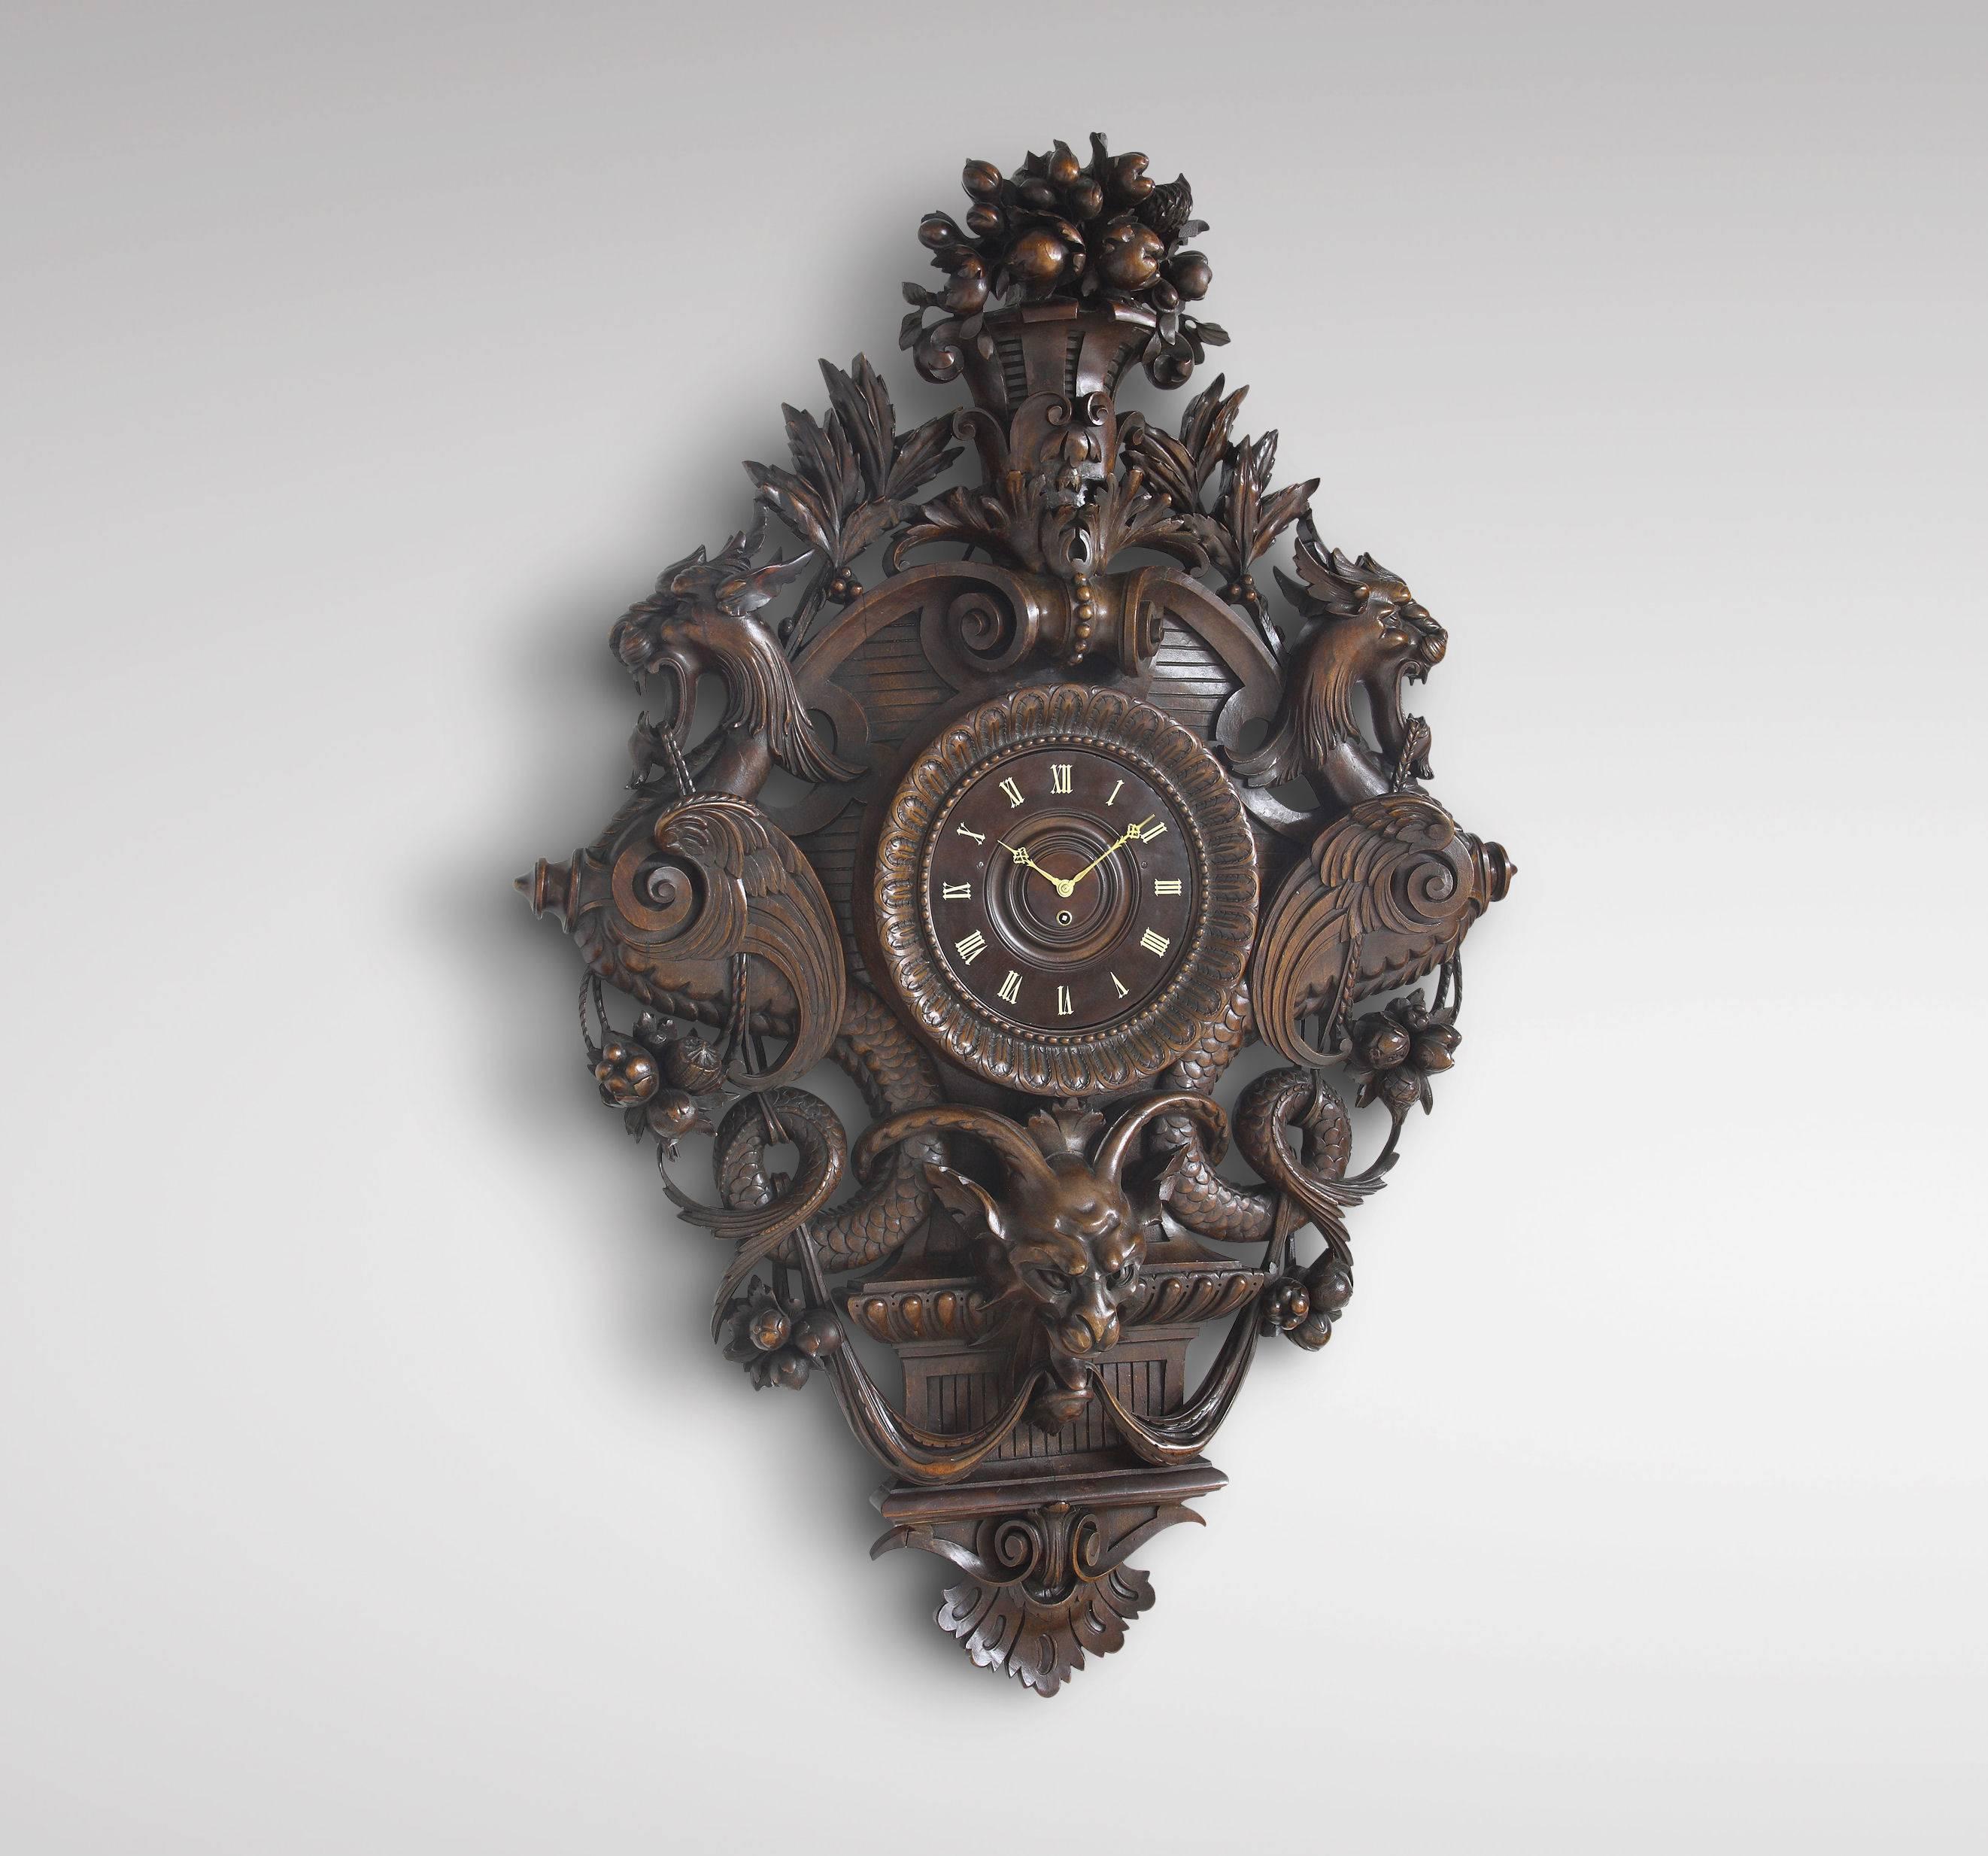 Exceptional carved walnut wall clock by Charles-François Rossigneux, Paris, circa 1870. The clock dial in waxed and polished walnut, with Gothic-style Roman hour chapters painted in white, chased gilt-brass hands; the case, in the form of a